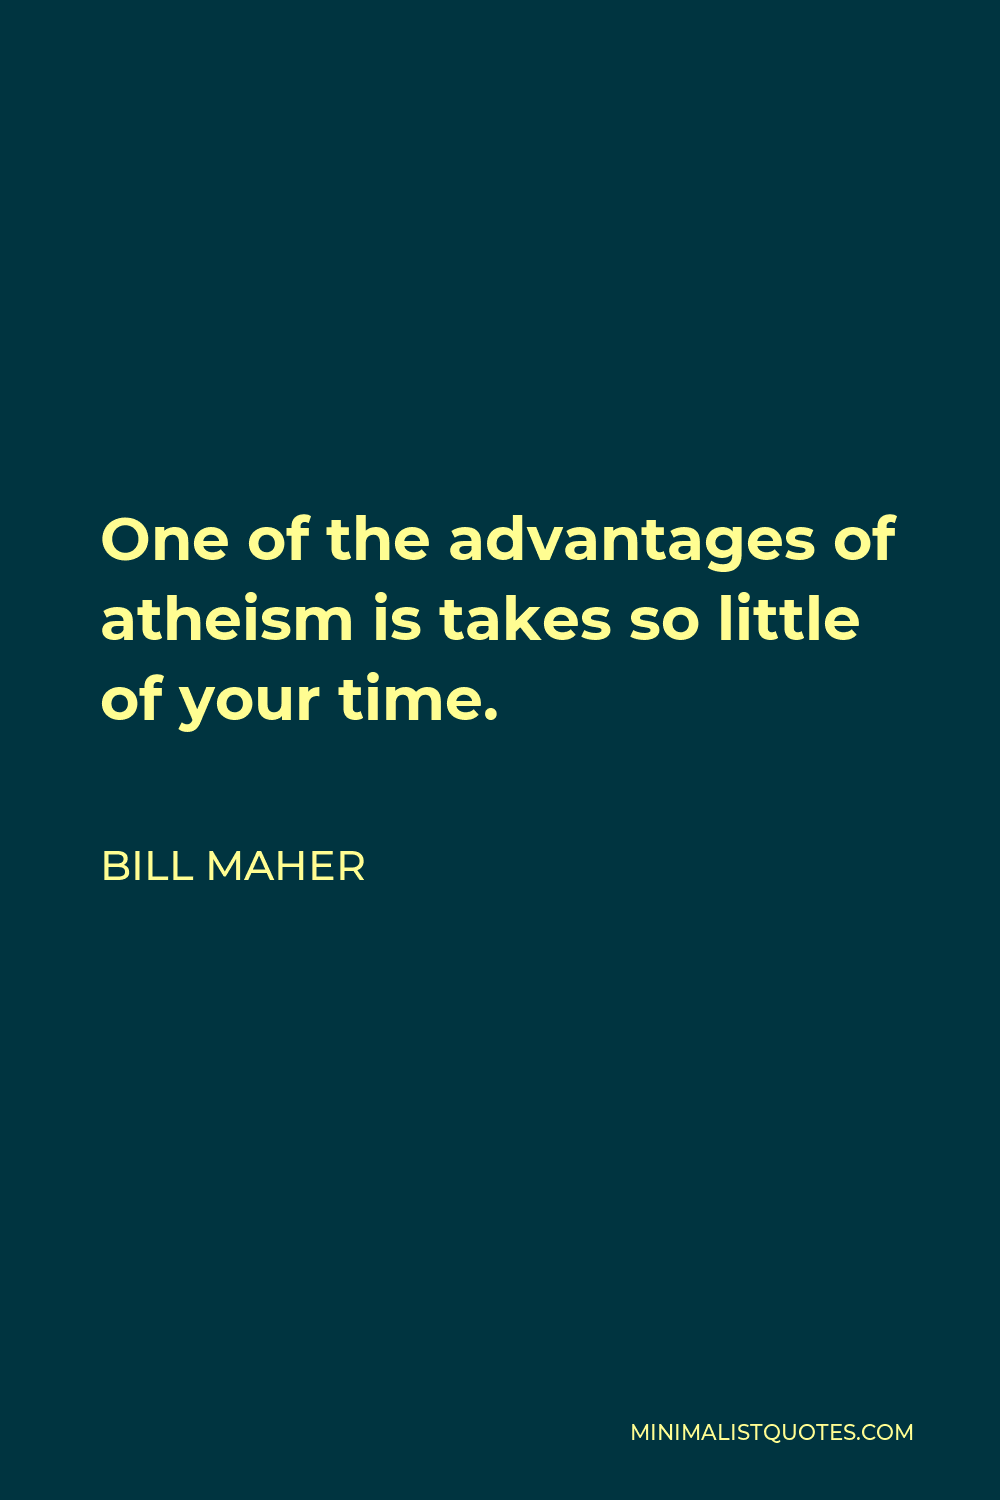 Bill Maher Quote - One of the advantages of atheism is takes so little of your time.